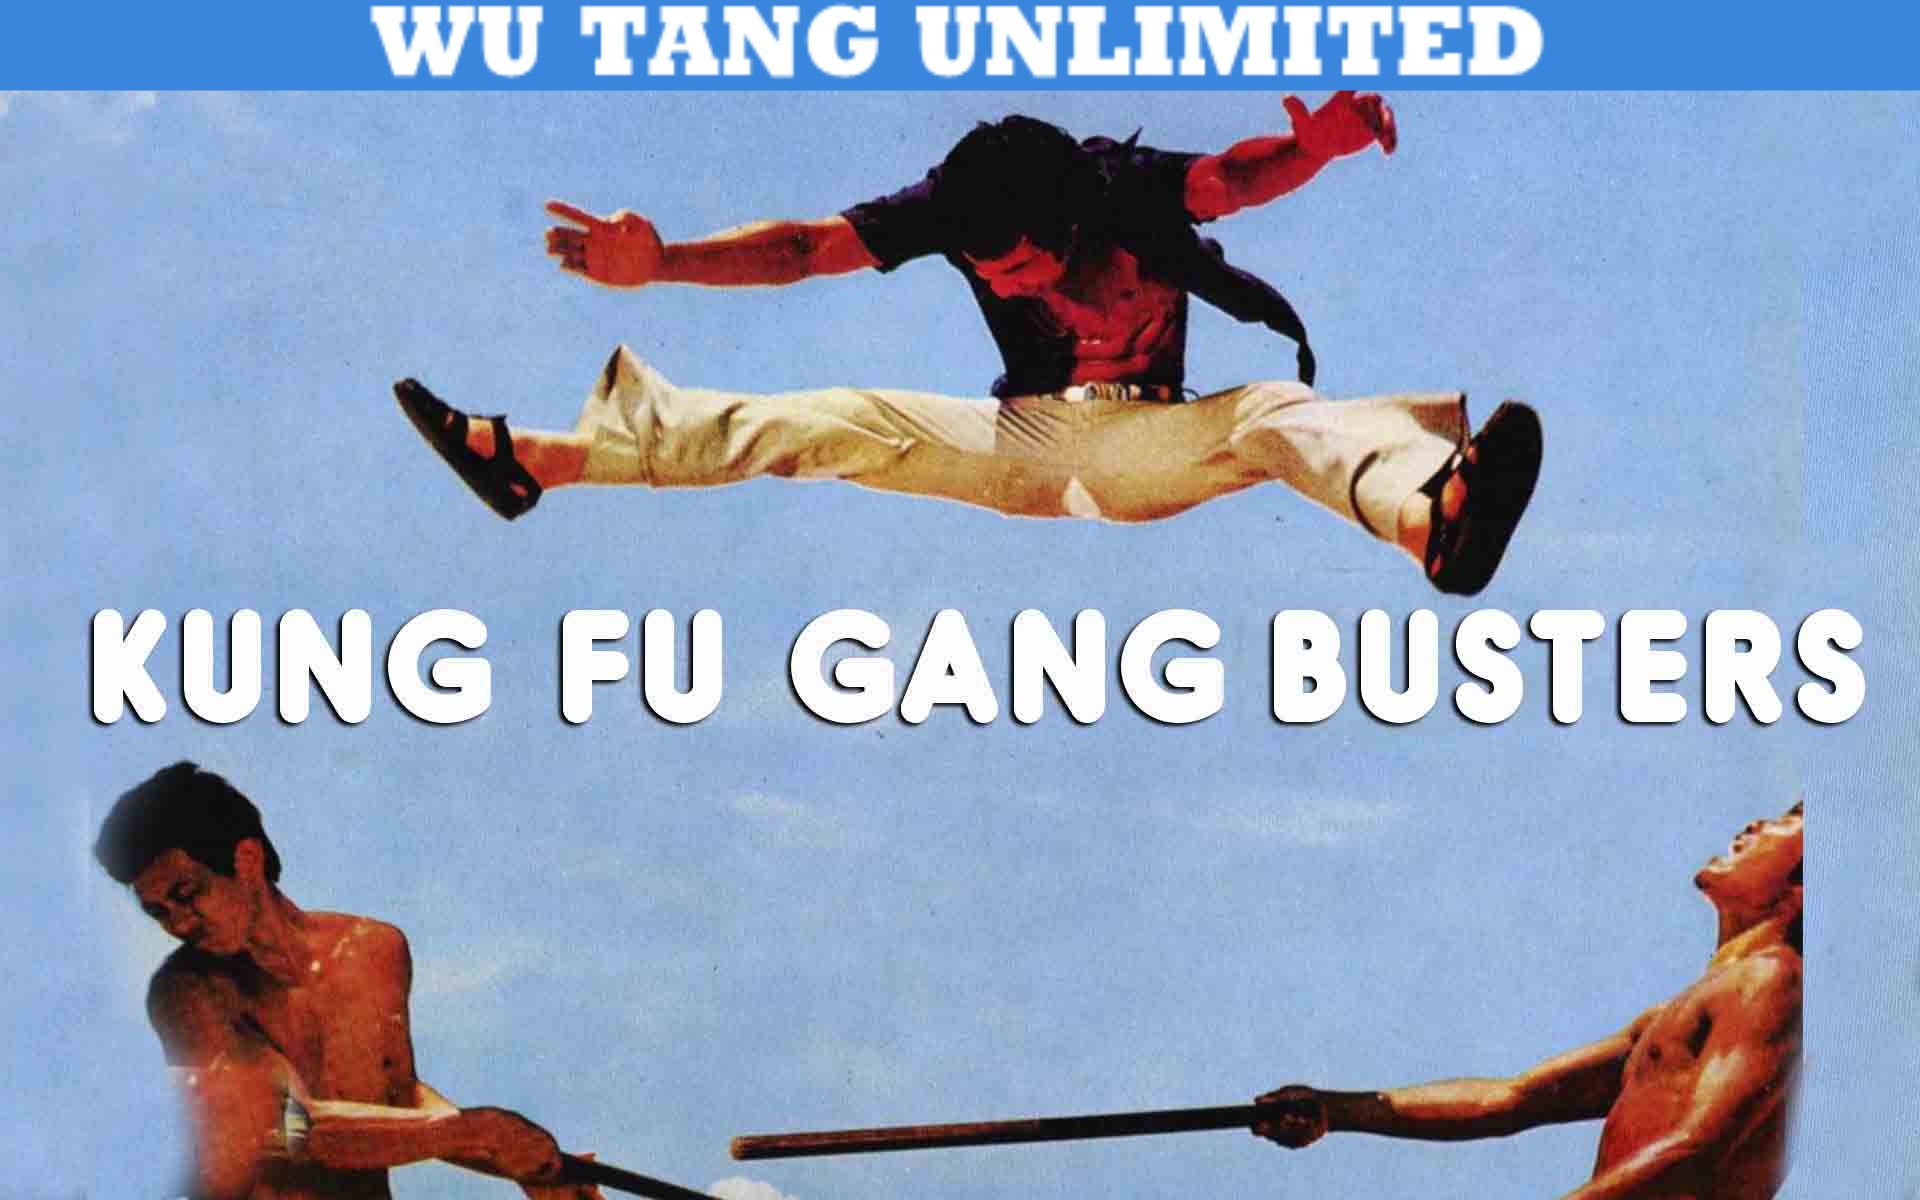 Kung Fu Gangbusters